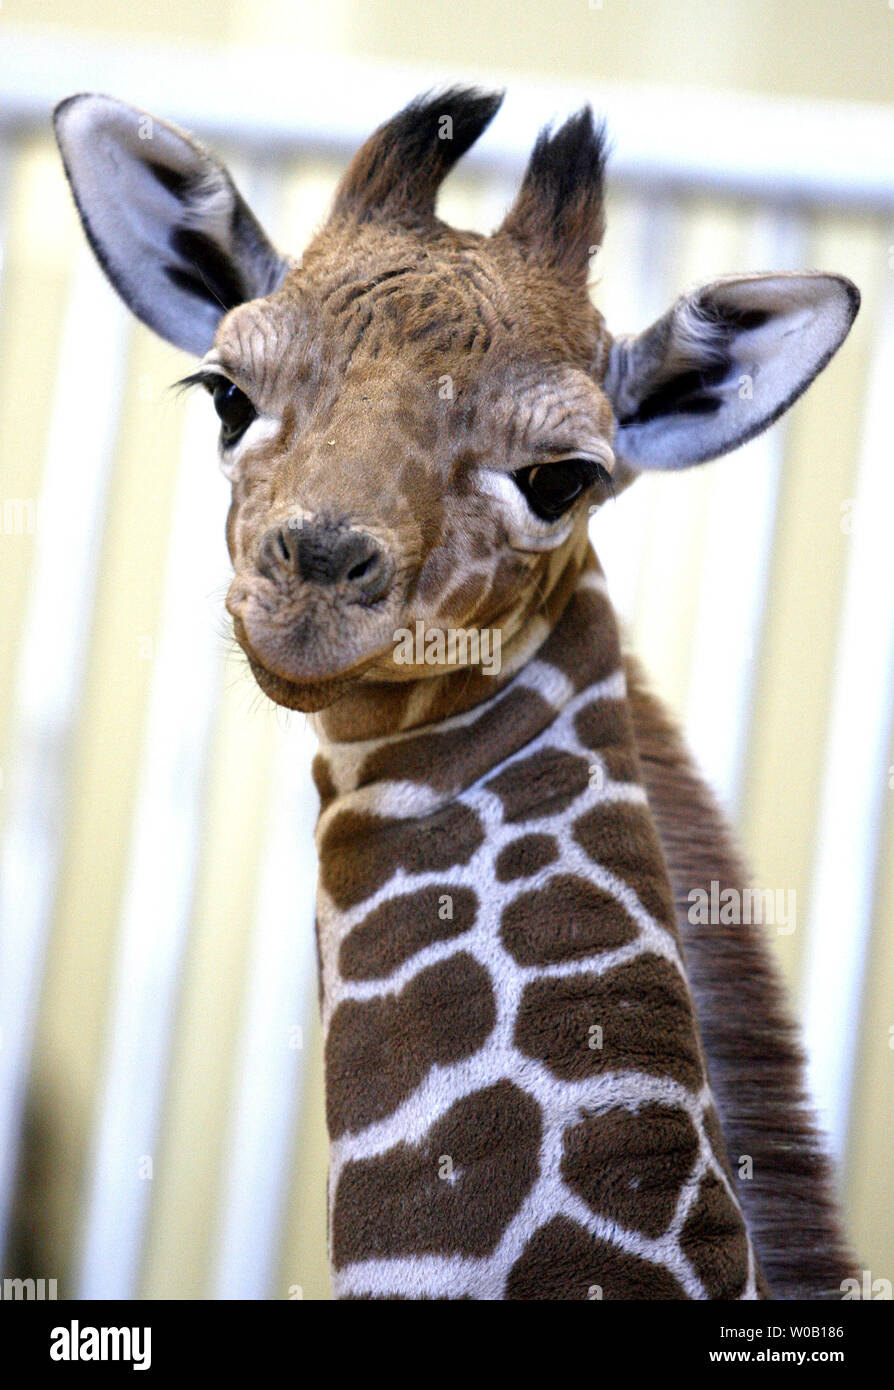 Six Flags Discovery Kingdom's newest edition, a 145-lb., approximately 5-foot 10-inch inch tall male giraffe calf born on December 14, at Six Flags Discovery Kingdom, Vallejo, California, on December 23, 2009.    UPI/Ken James Stock Photo